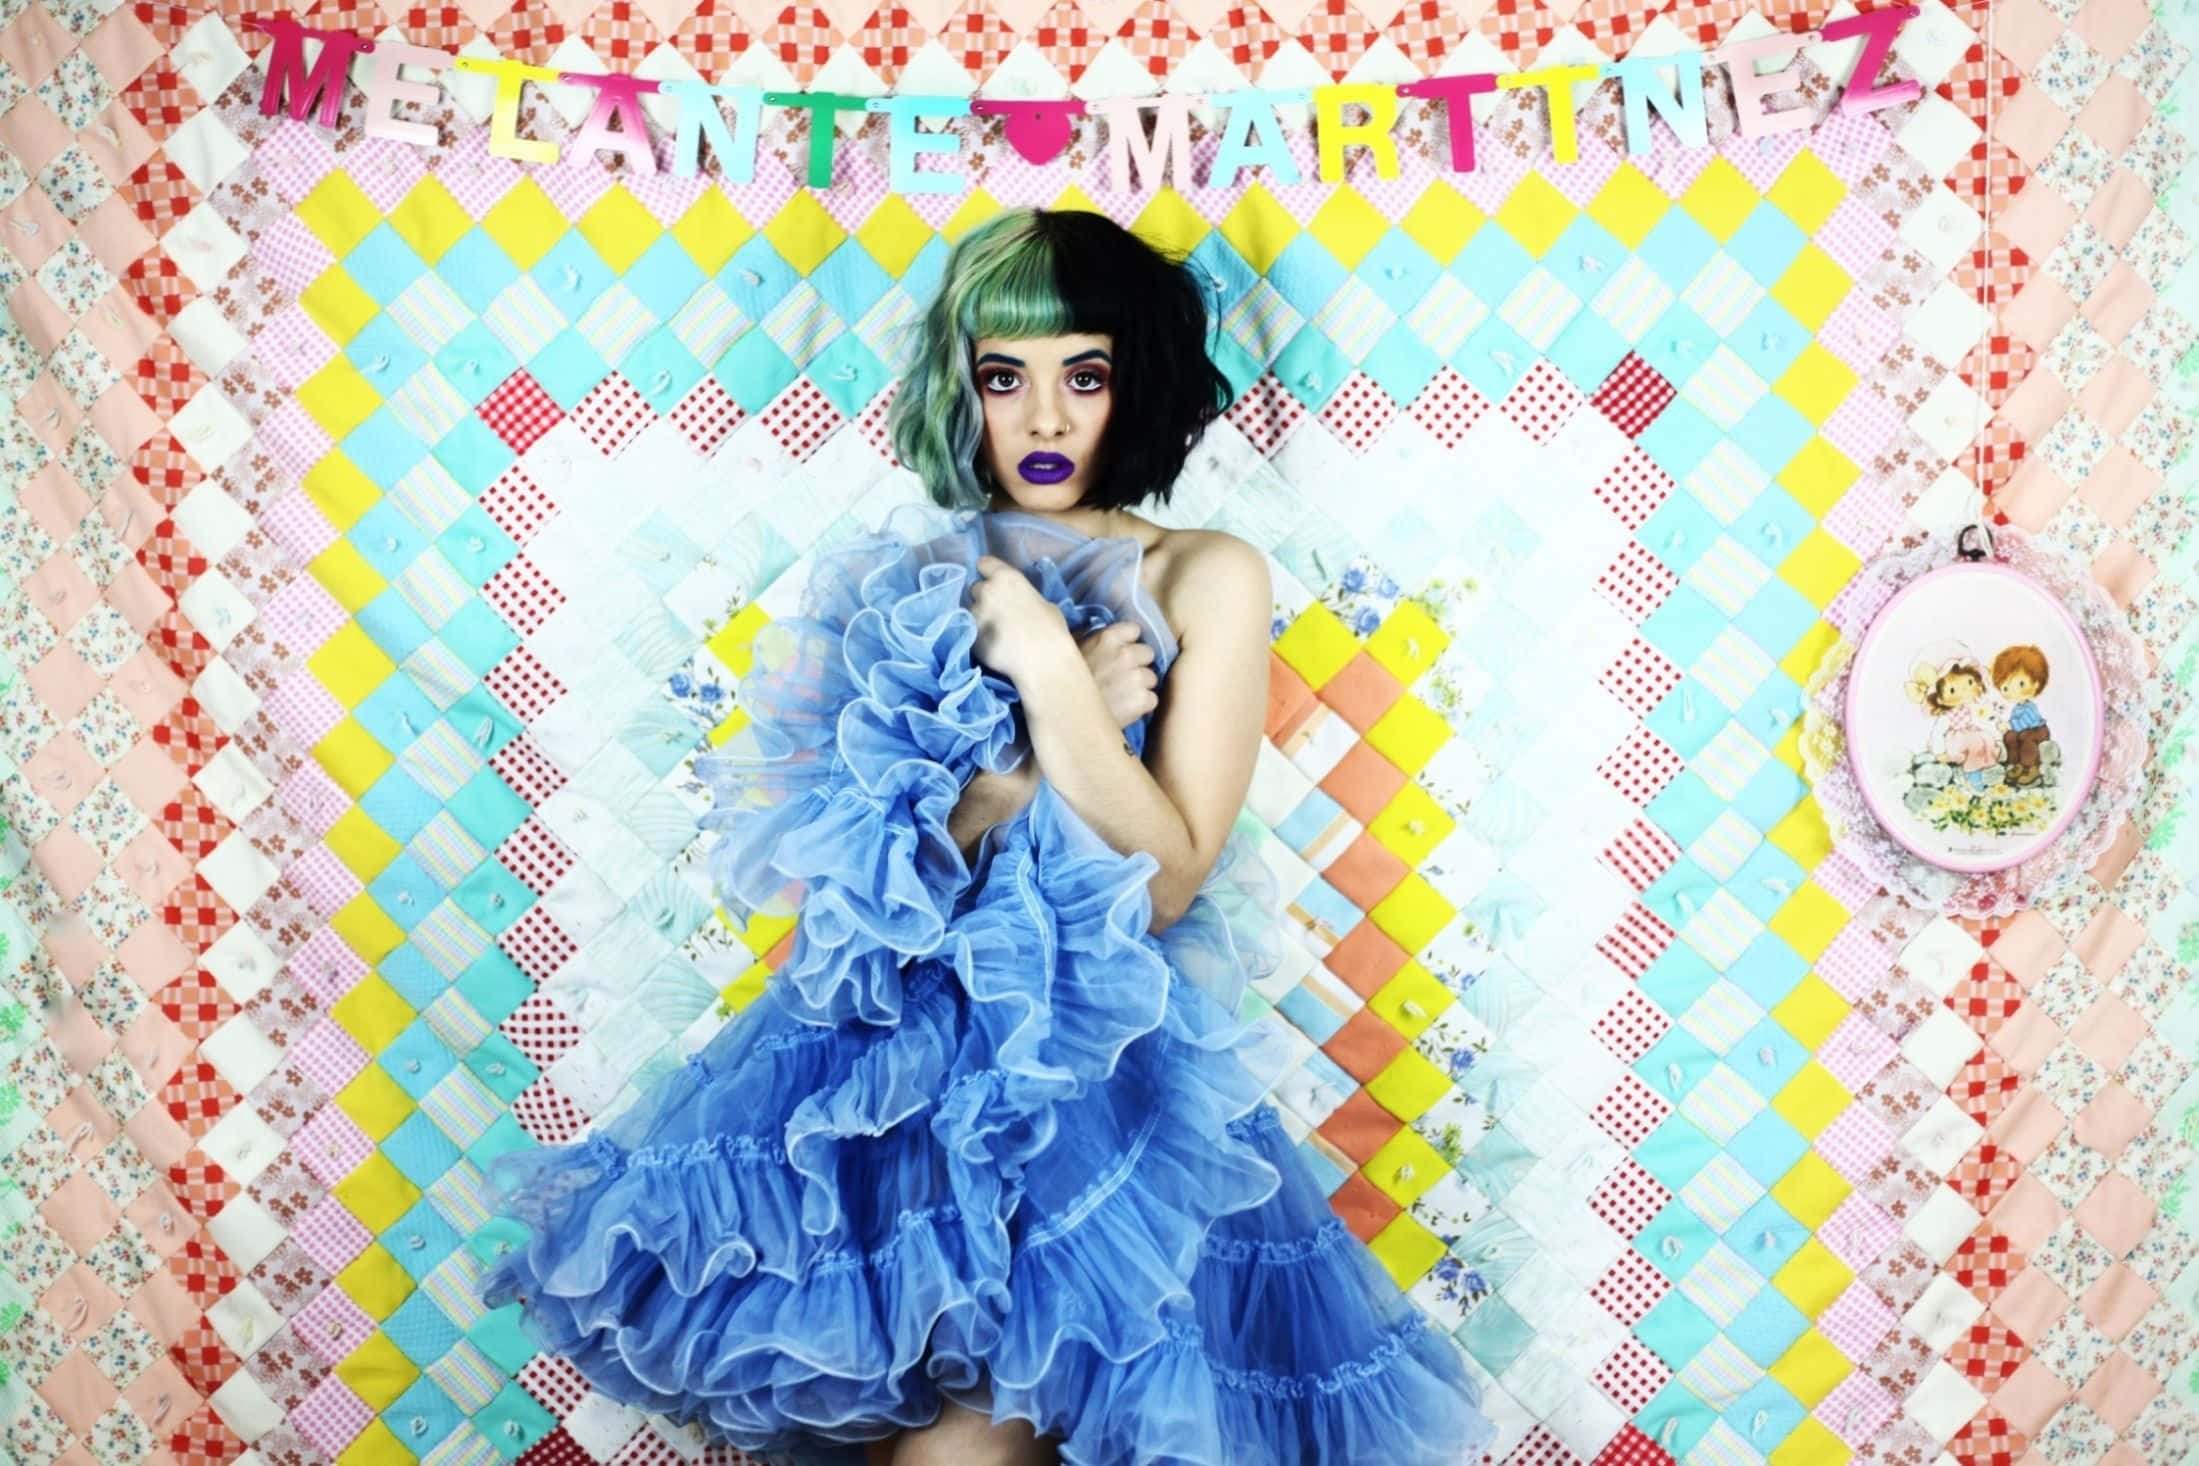 Melanie Martinez performing on stage in her signature style